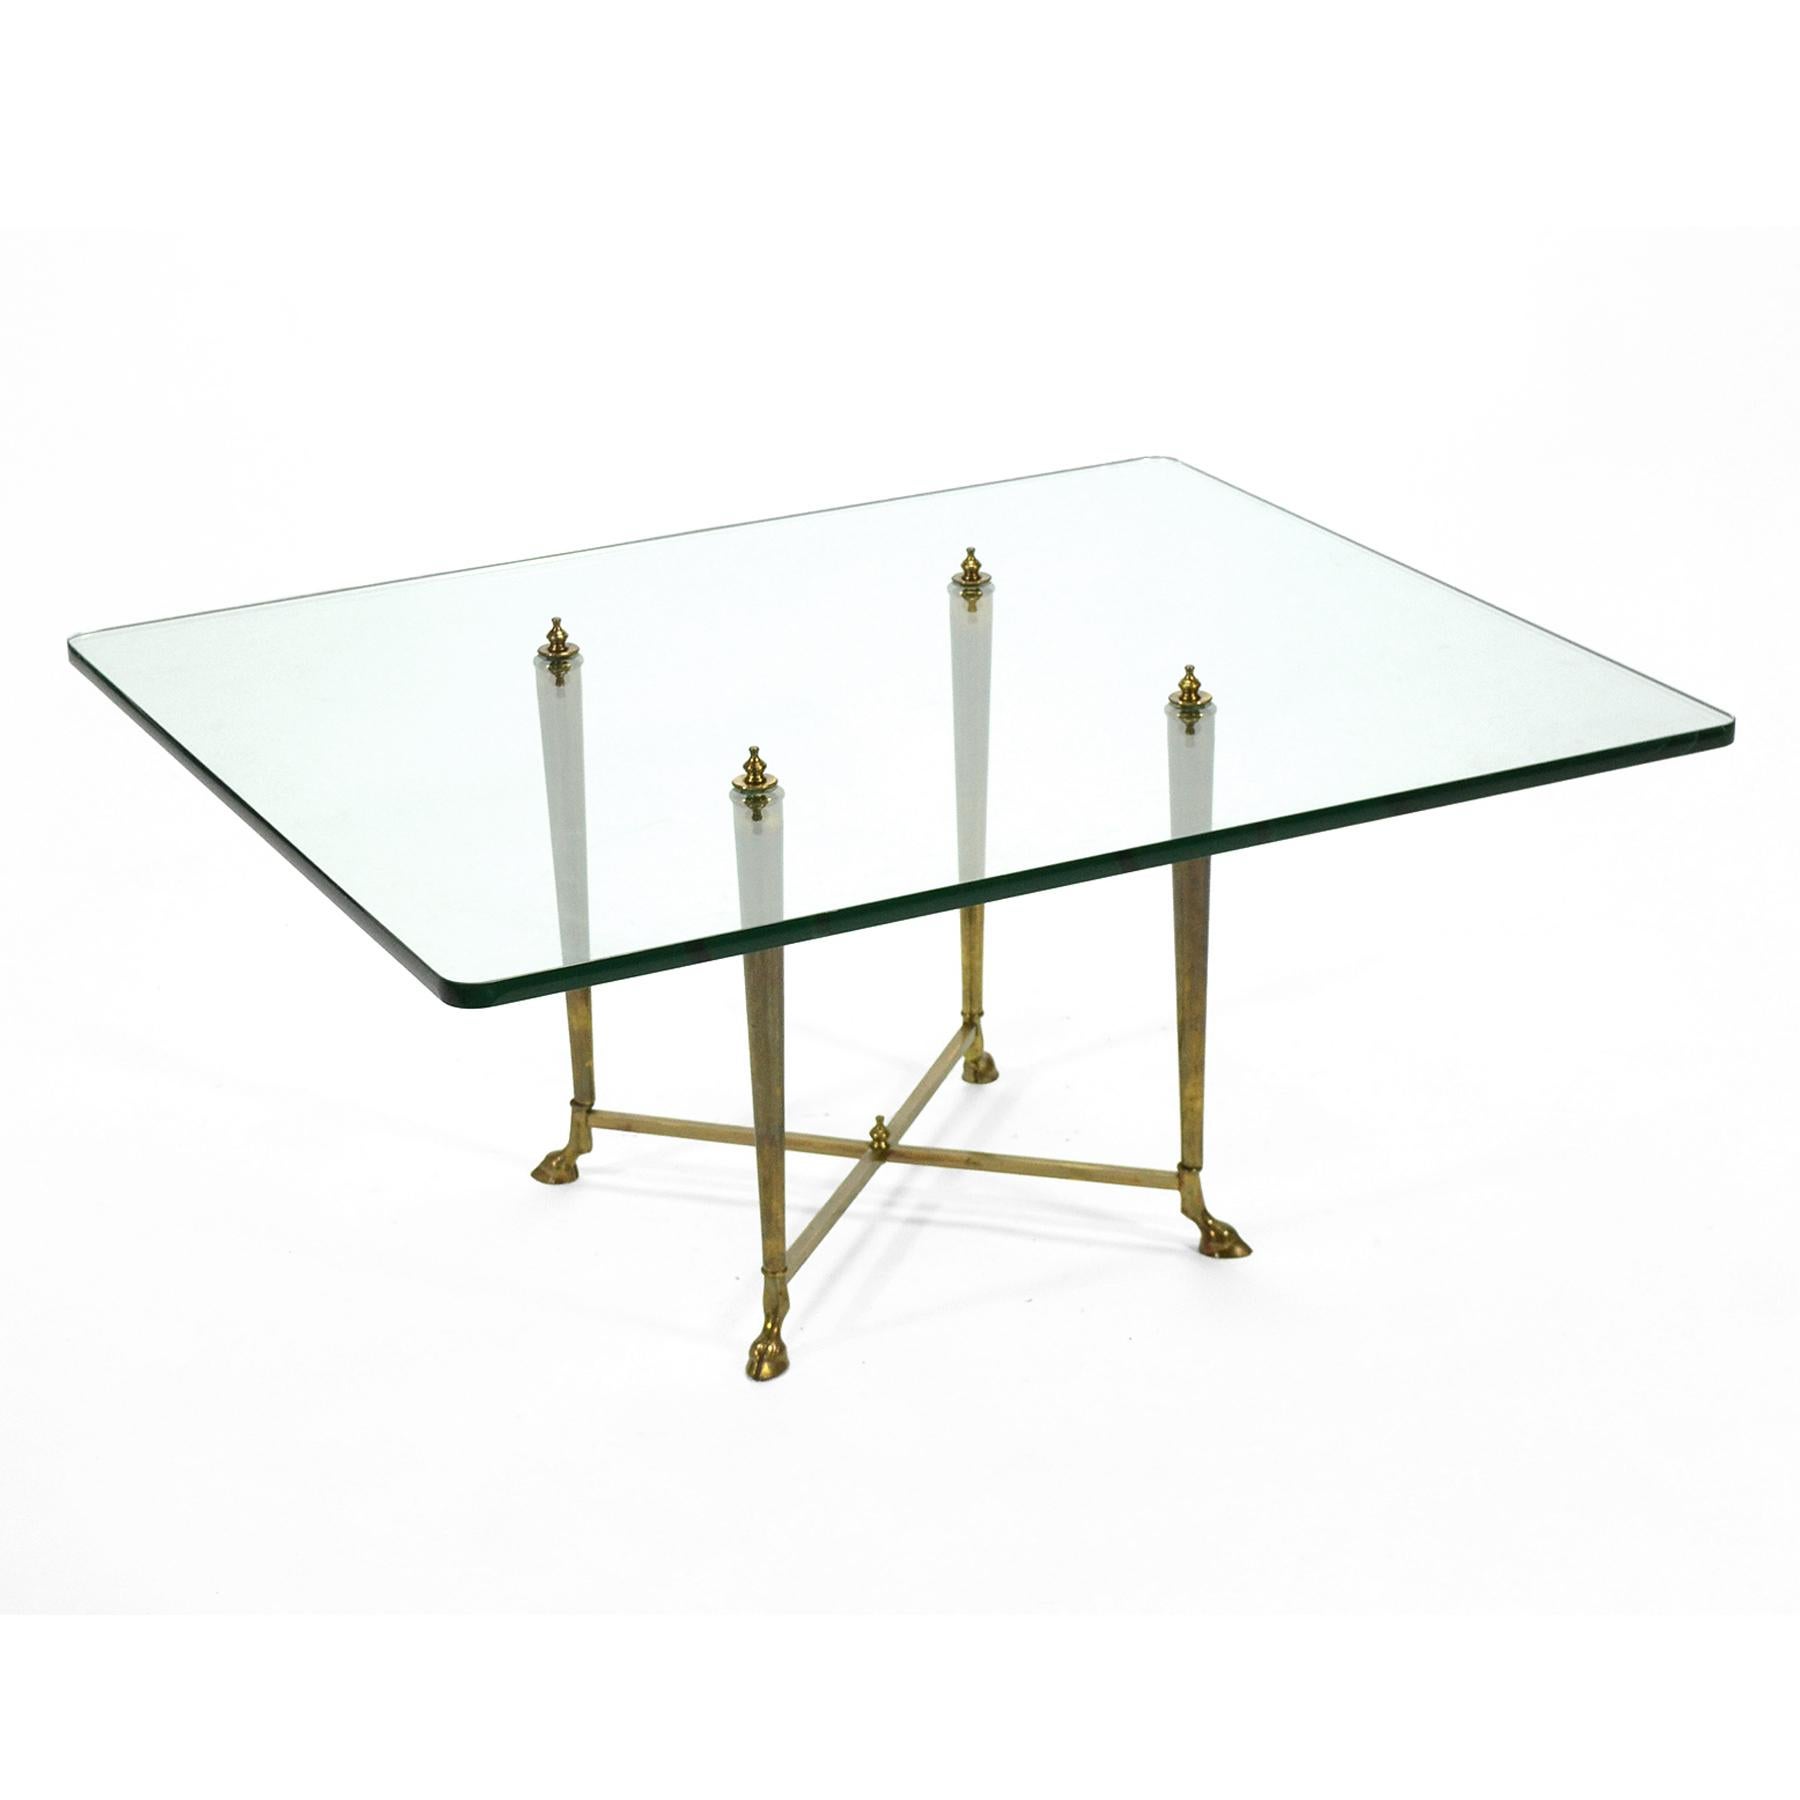 This very striking cocktail table has a base of solid brass with hoof feet that pierces and supports the glass top. Light, slender, and well engineered, it is a great example of Italian design.